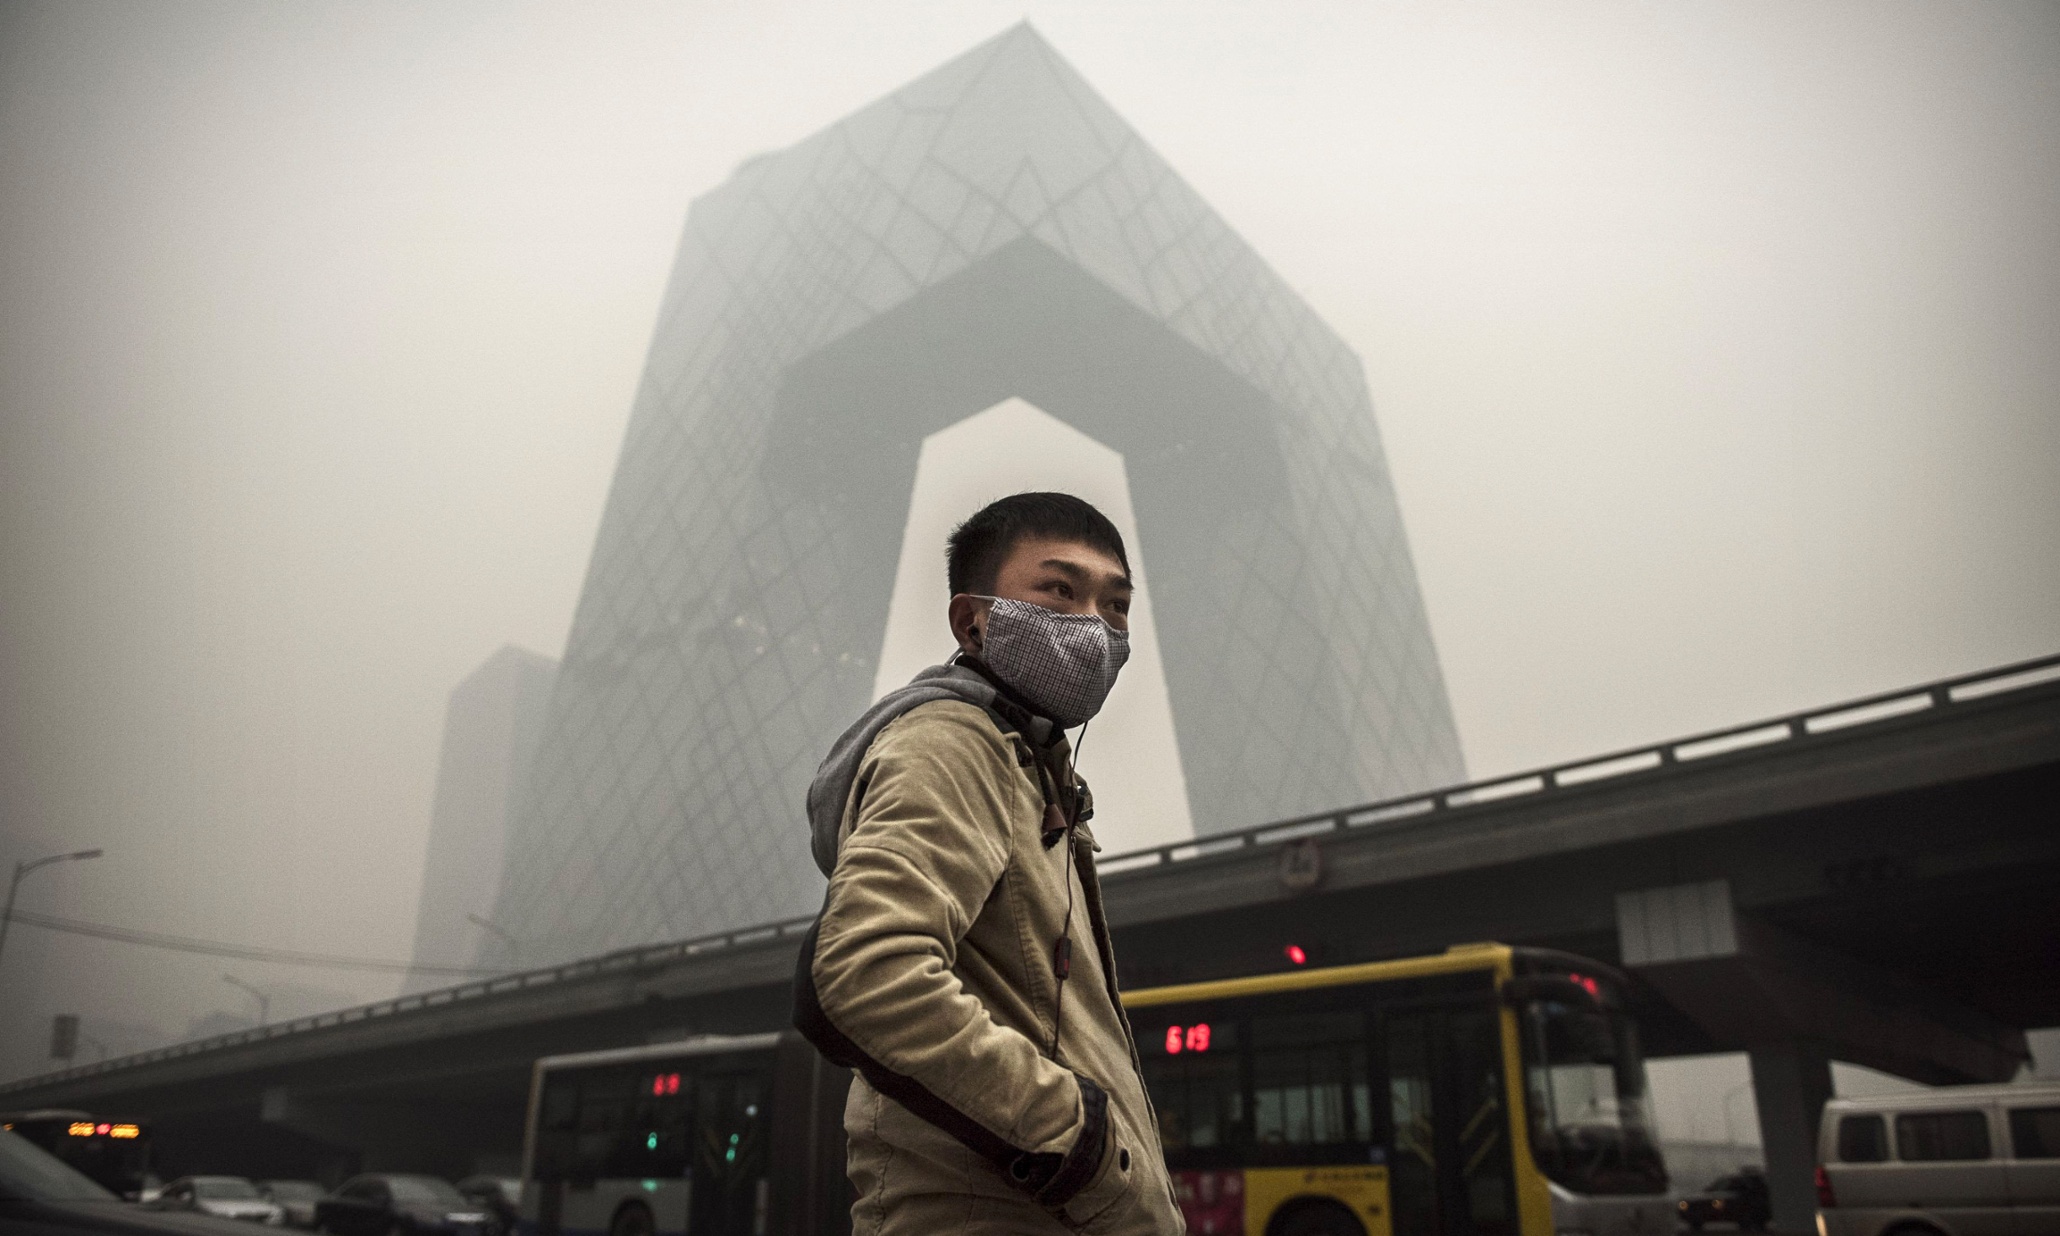 BEIJING, CHINA - NOVEMBER 29: A Chinese man wears a mask as he waits to cross the road near the CCTV building during heavy smog on November 29, 2014 in Beijing, China. United States President Barack Obama and China's president Xi Jinping agreed on a plan to limit carbon emissions by their countries, which are the world's two biggest polluters, at a summit in Beijing earlier this month. (Photo by Kevin Frayer/Getty Images) *** BESTPIX ***